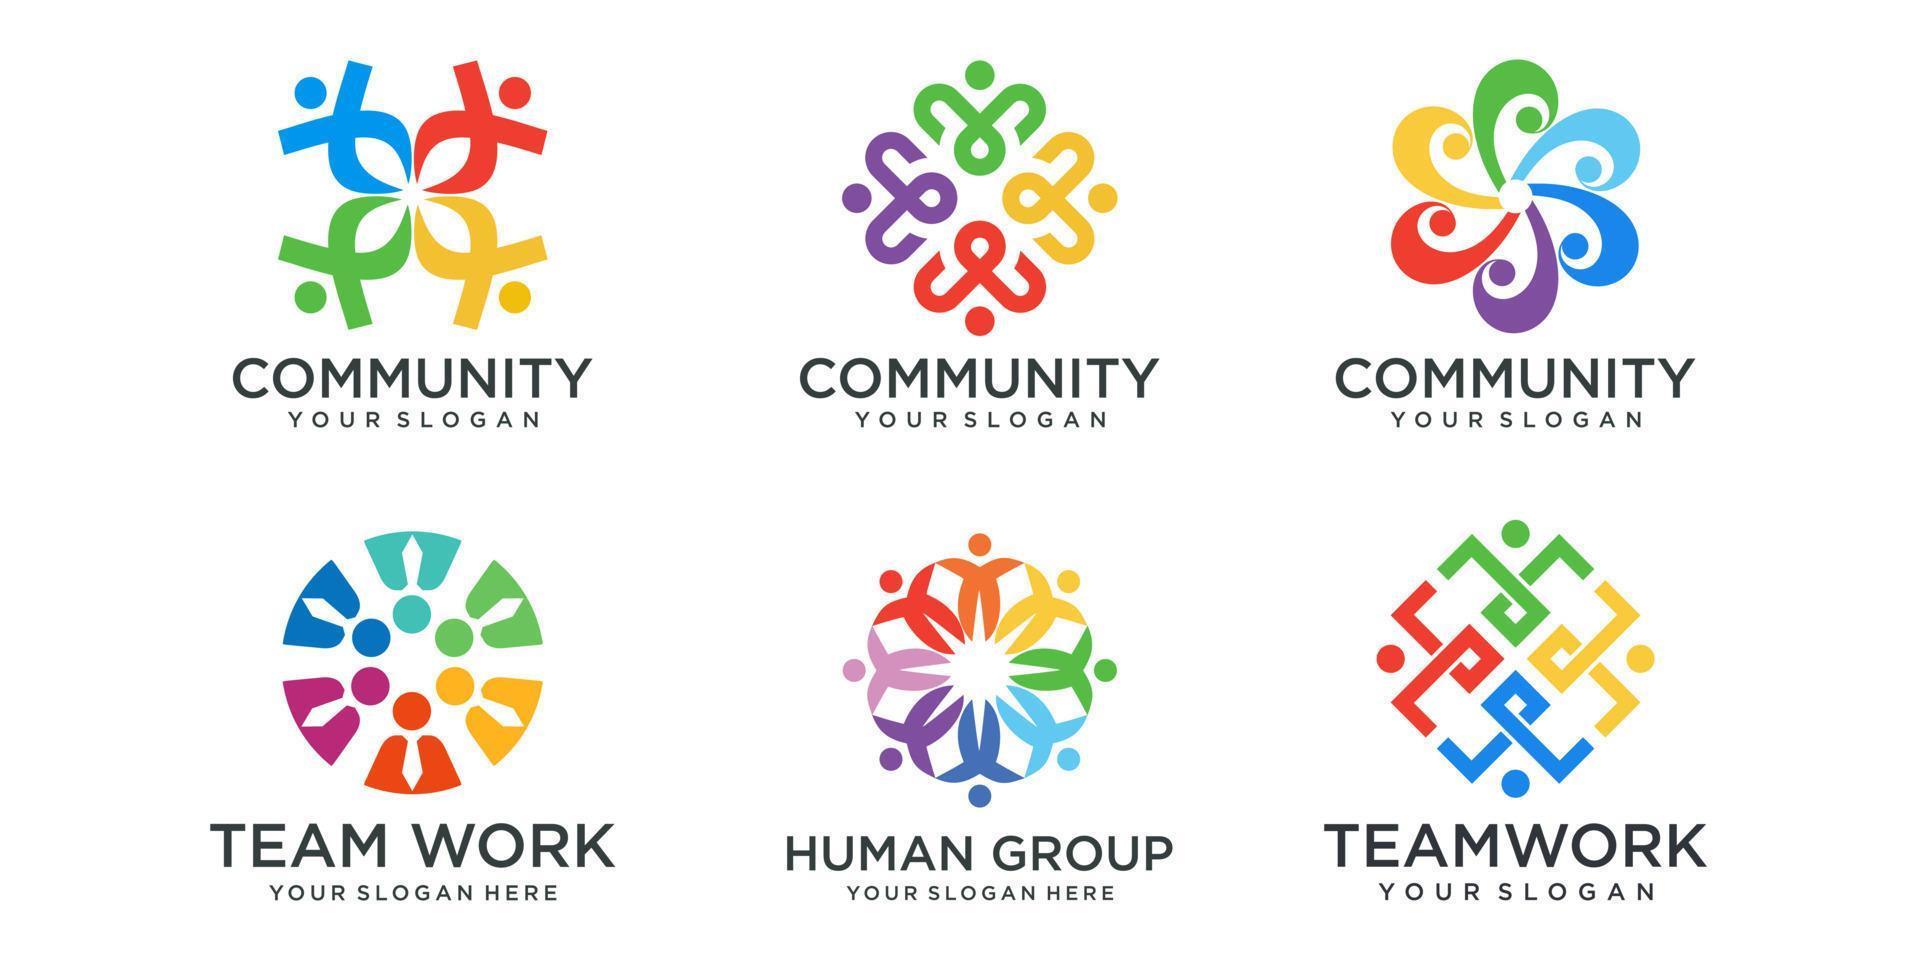 Business People Together logo icon set. logo template can represent unity and solidarity in group vector